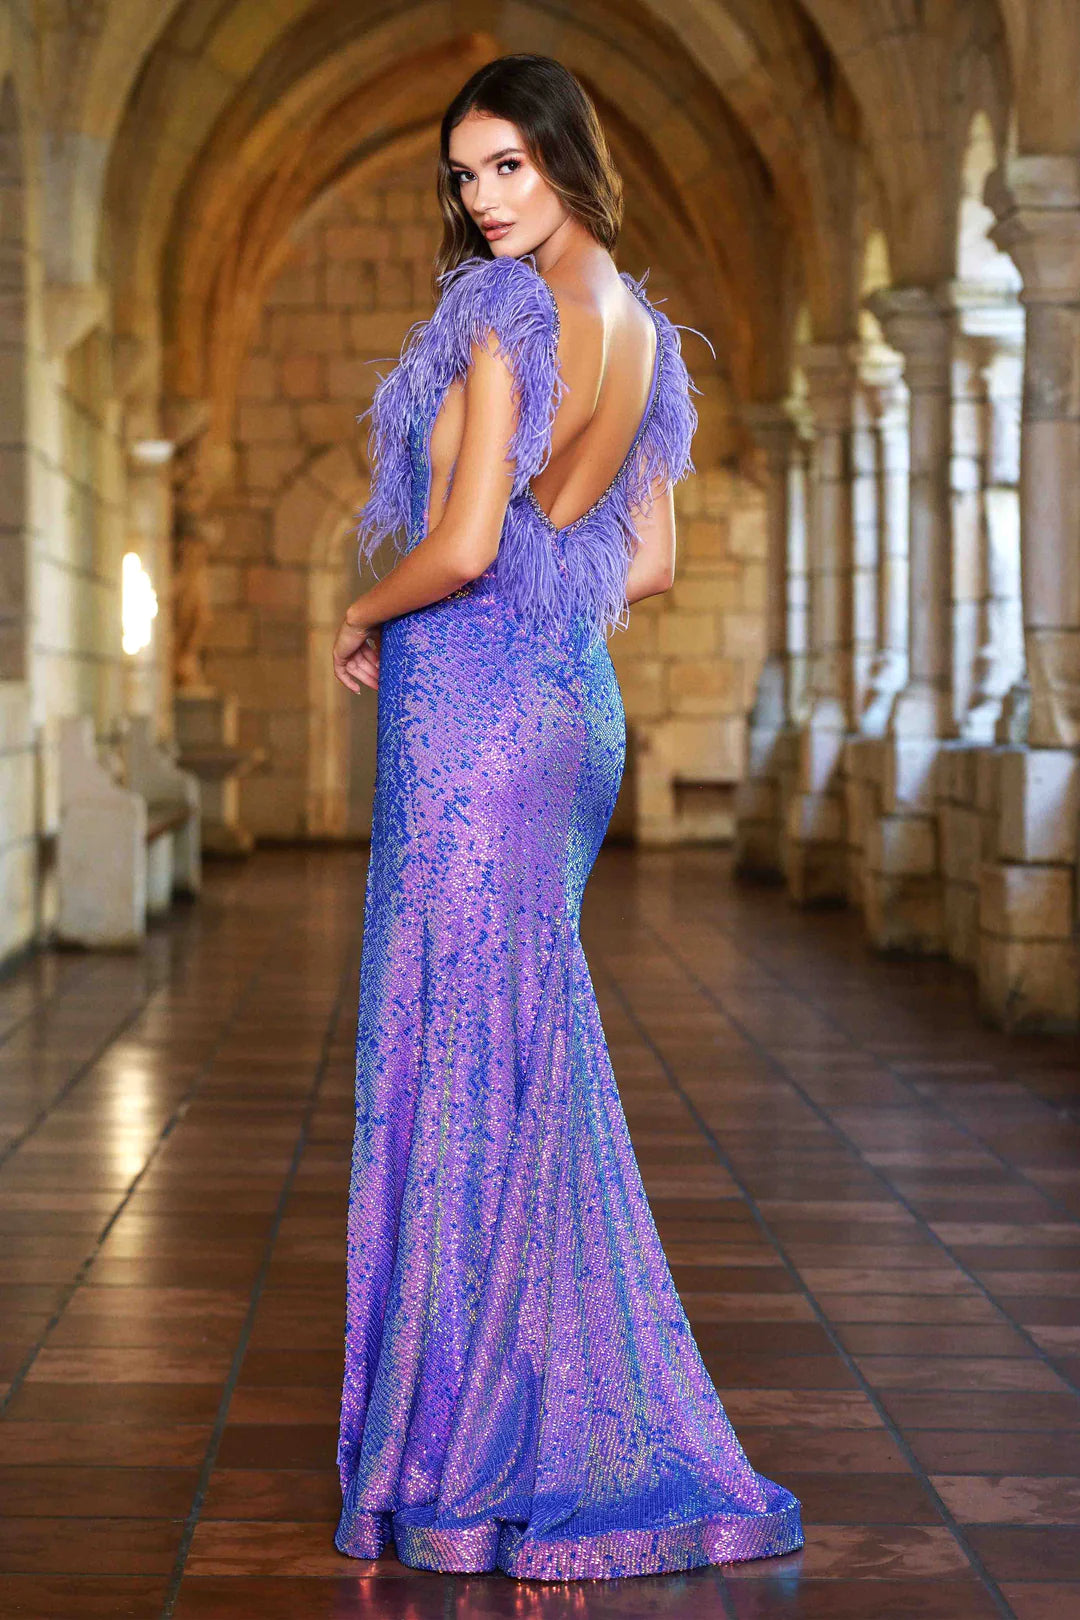 The Ava Presley 38896 dress features a stunning fitted sequin silhouette and feather detailing along a flattering v-neckline, and a daring open back. Perfect for proms and pageants, this gown will make you feel confident and glamorous.  Sizes: 00-16  Colors: Powder Blue, Iridescent Purple, Red, Iridescent Black, Black, Off White